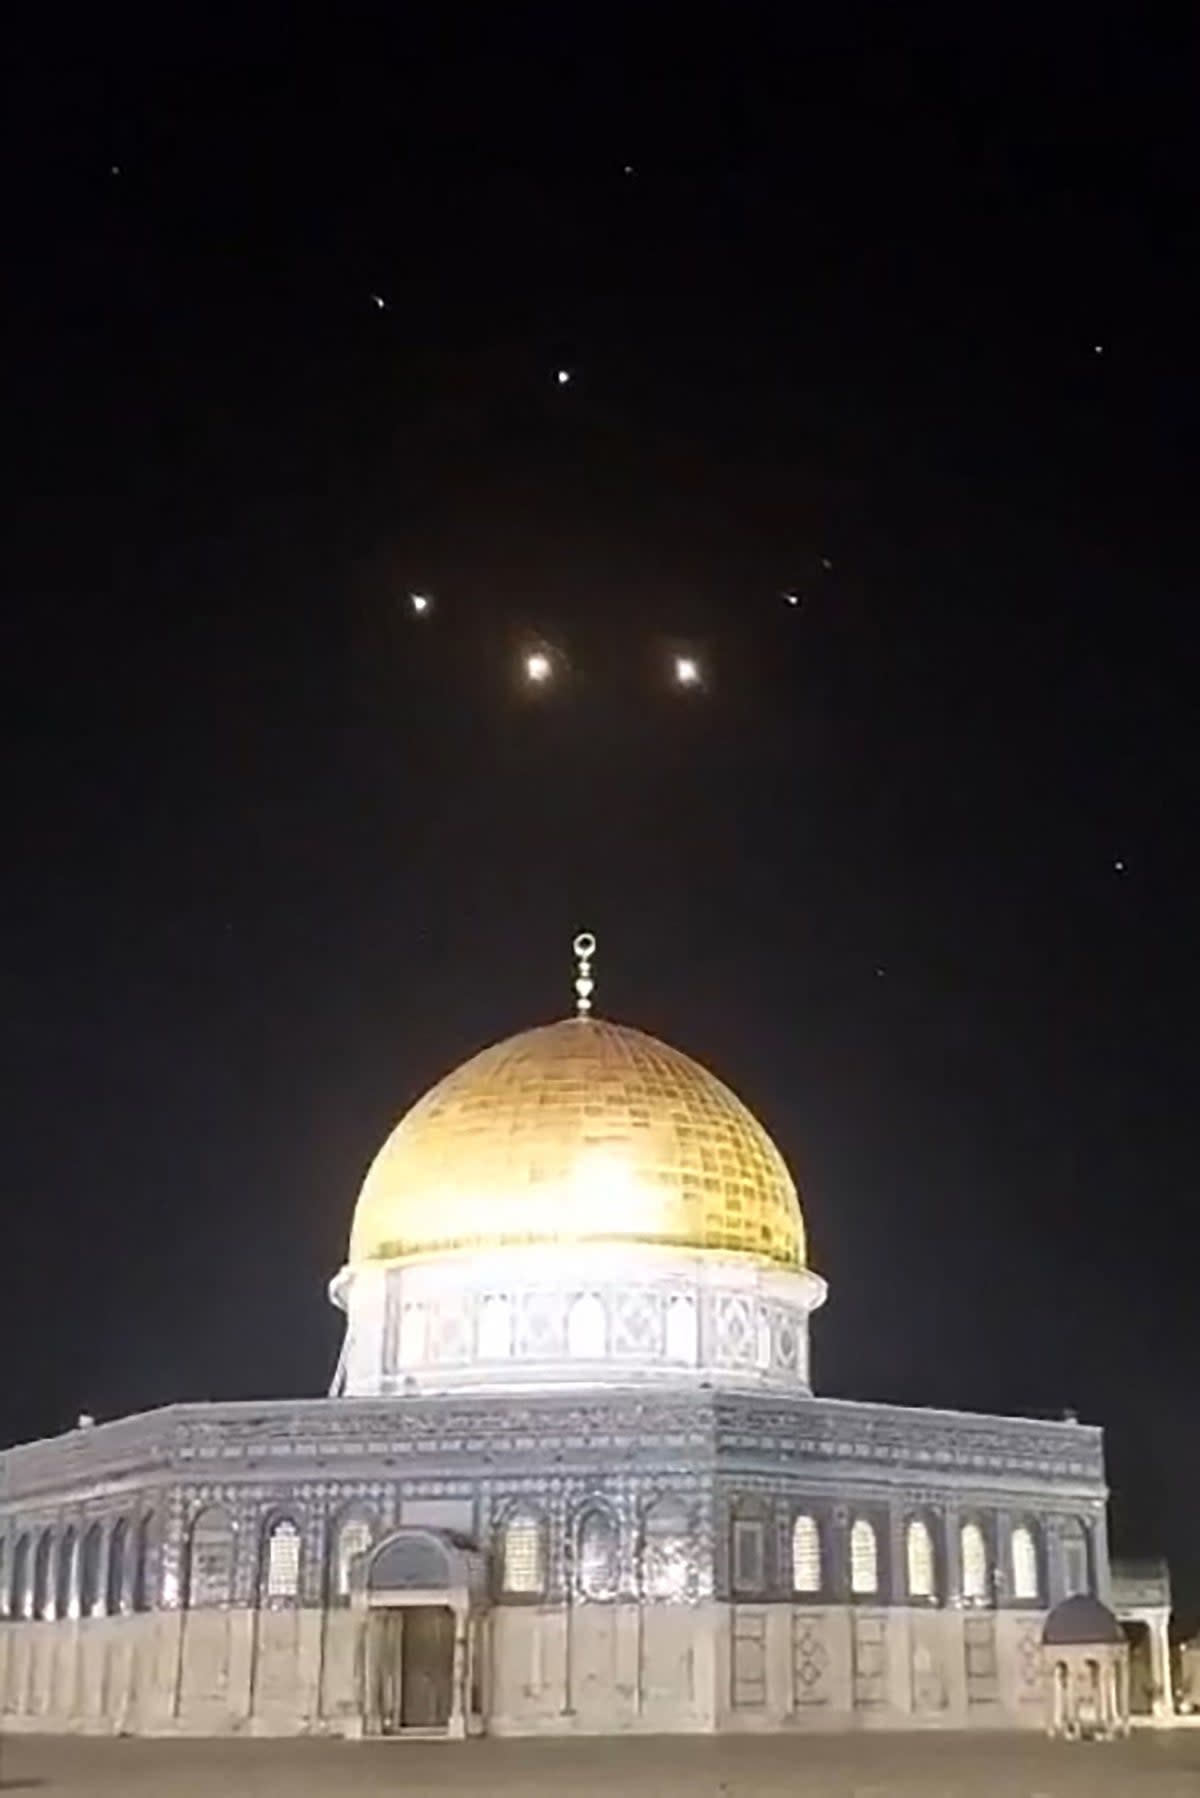 An image-grab from a video taken early on April 14, 2024, shows rocket trails in the sky above the Al-Aqsa Mosque compound in Jerusalem. (AFP via Getty Images)